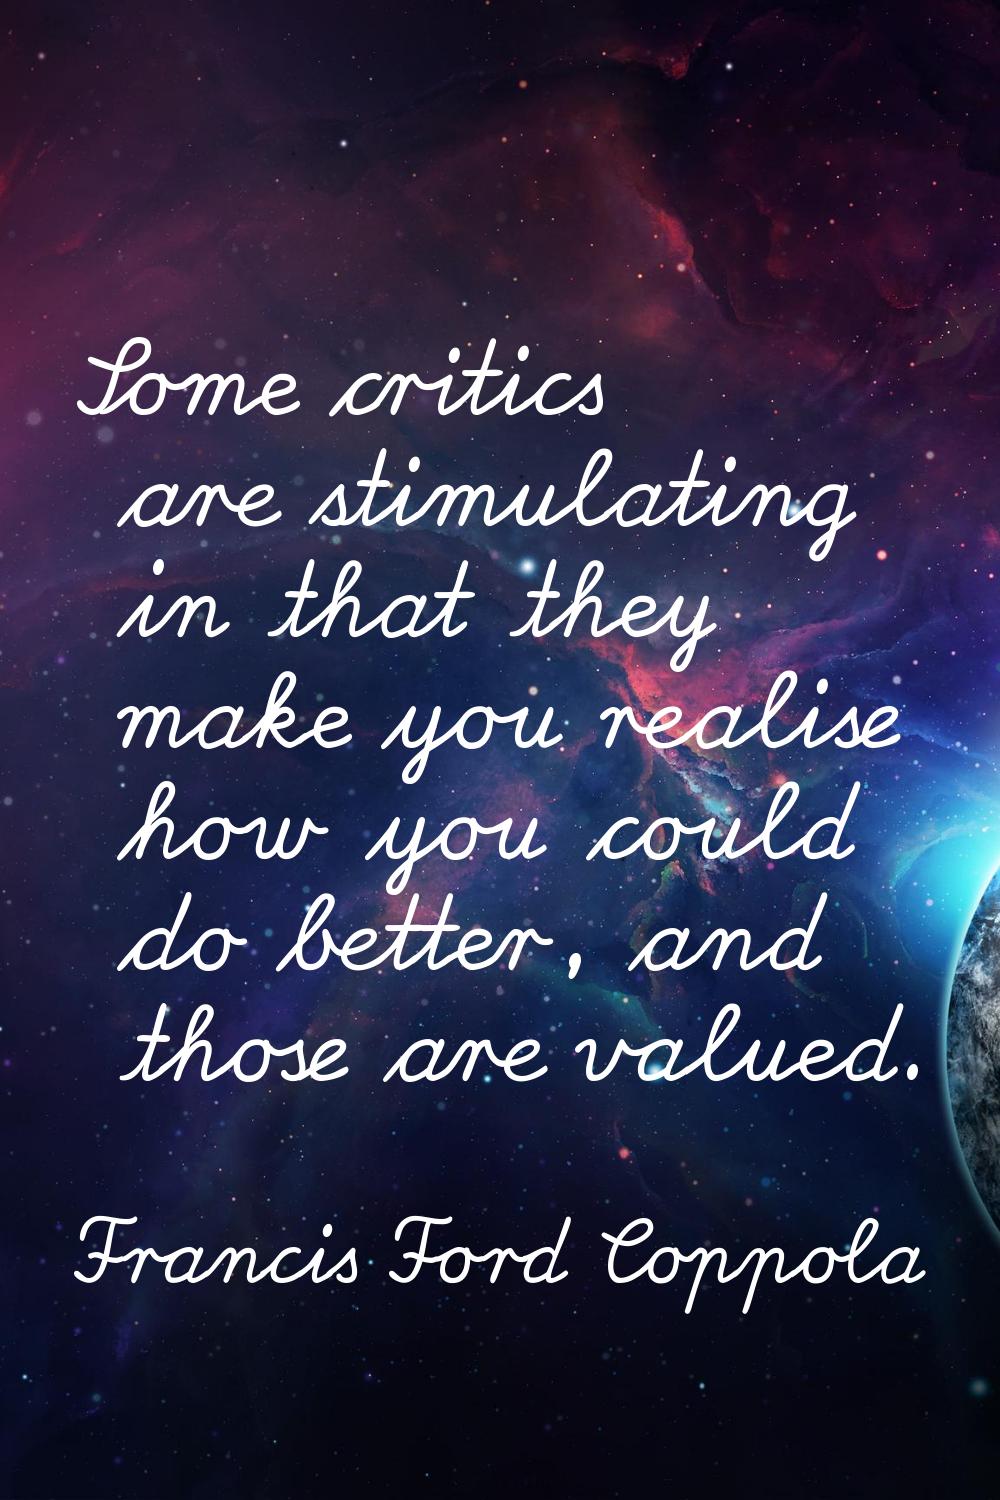 Some critics are stimulating in that they make you realise how you could do better, and those are v